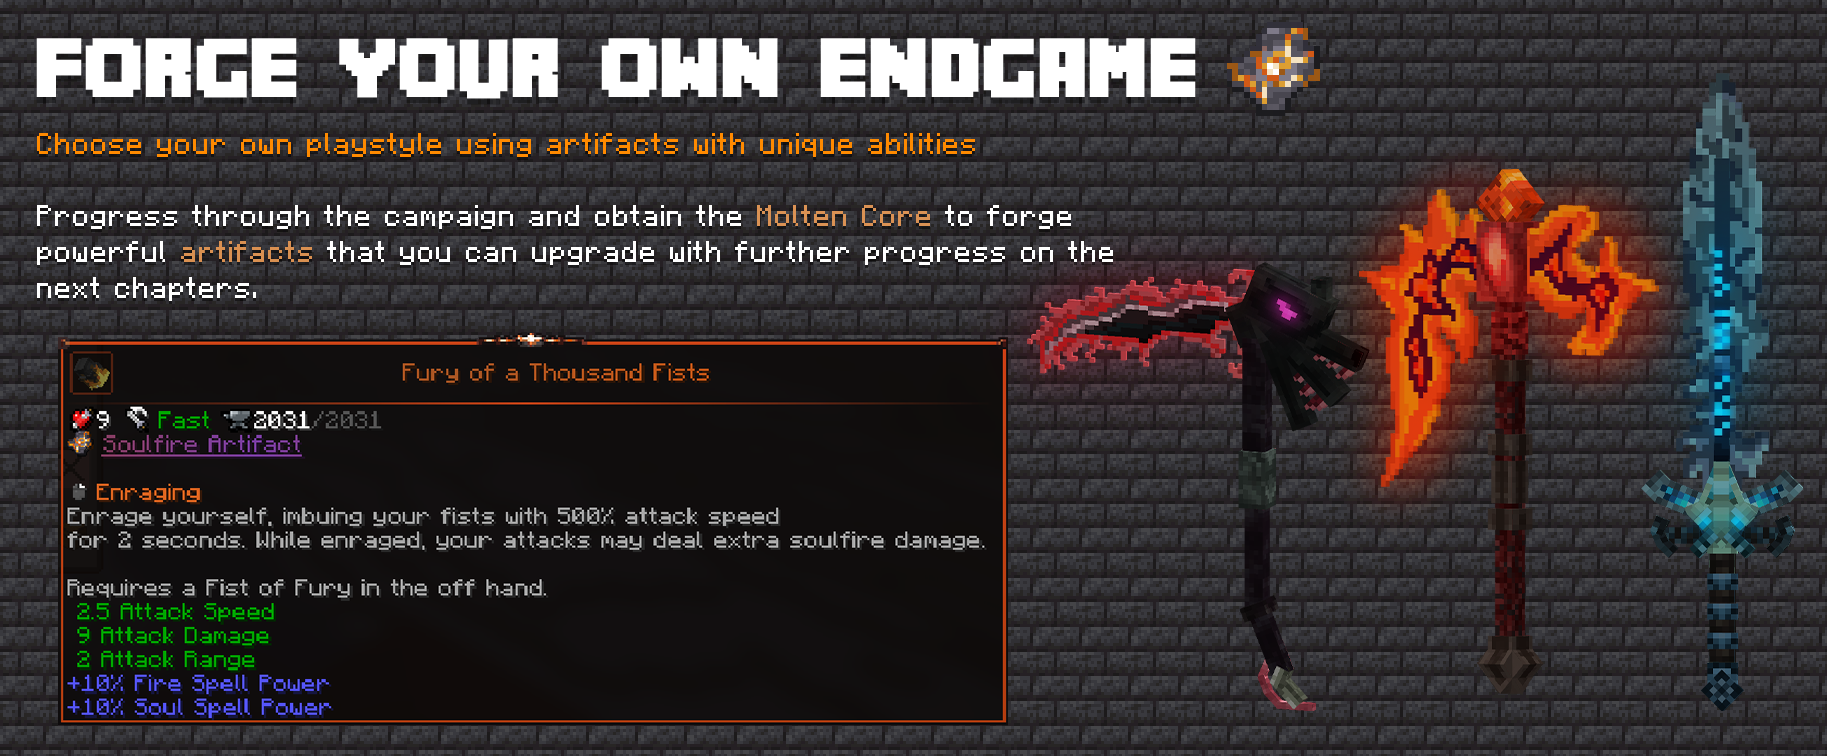 Forge your own endgame by creating powerful custom artifact weapons with unique abilities